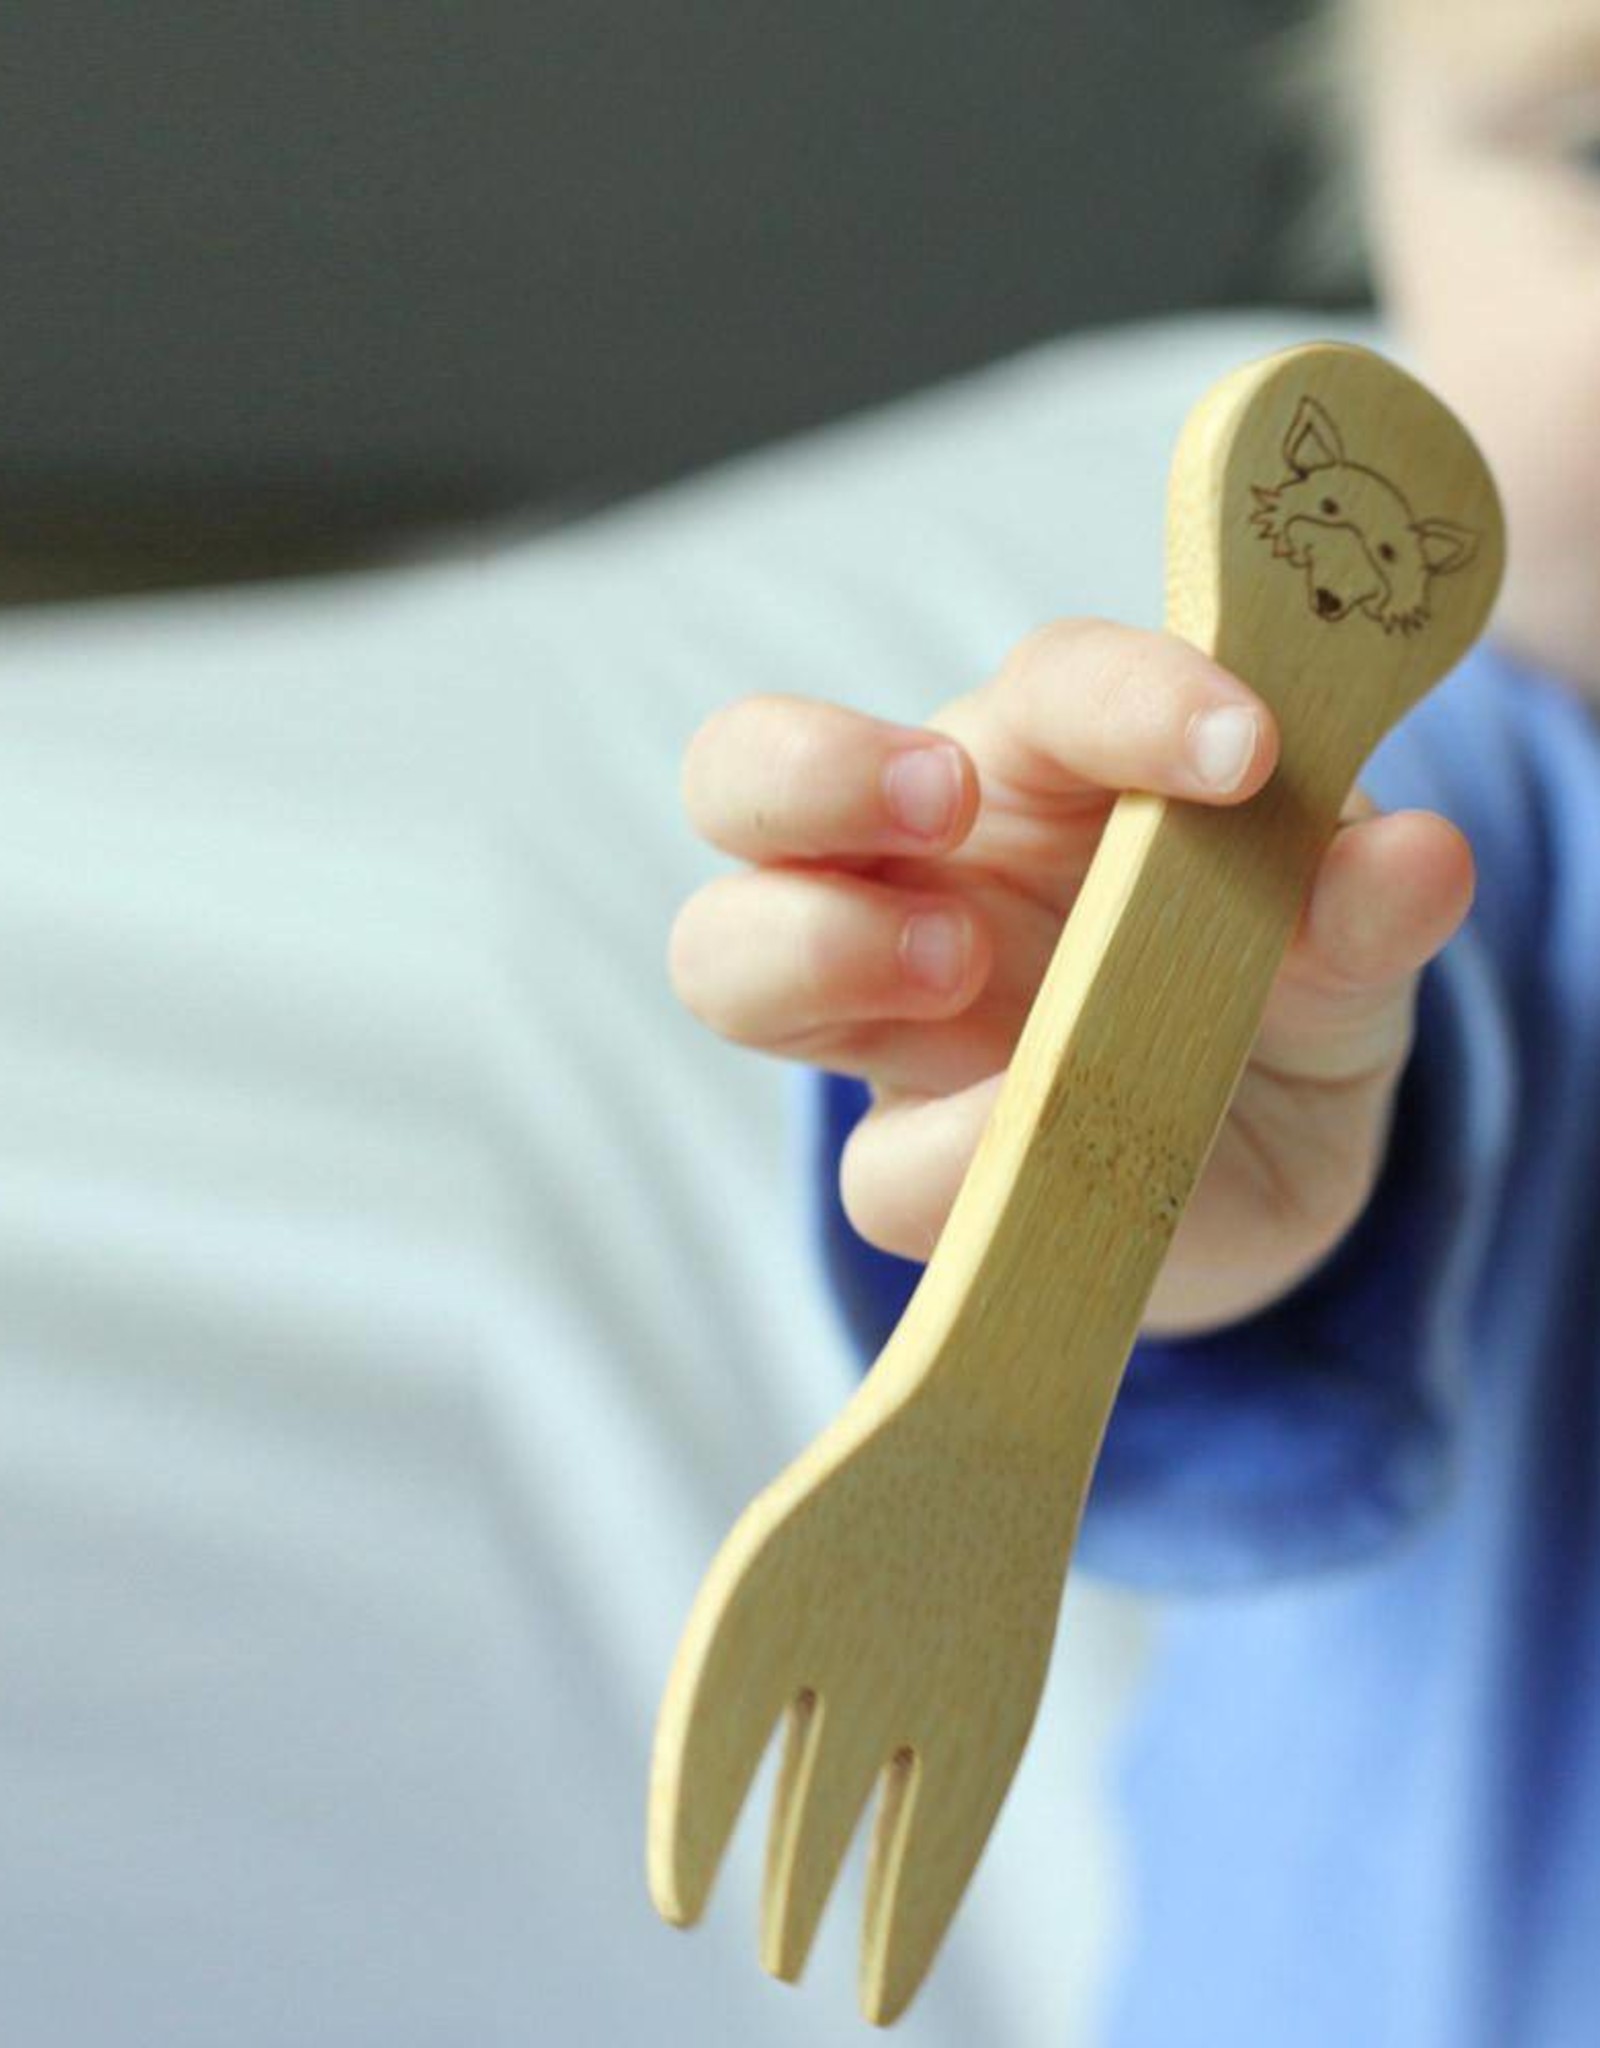 Kids Fork & Spoon Set Engraved with Animals